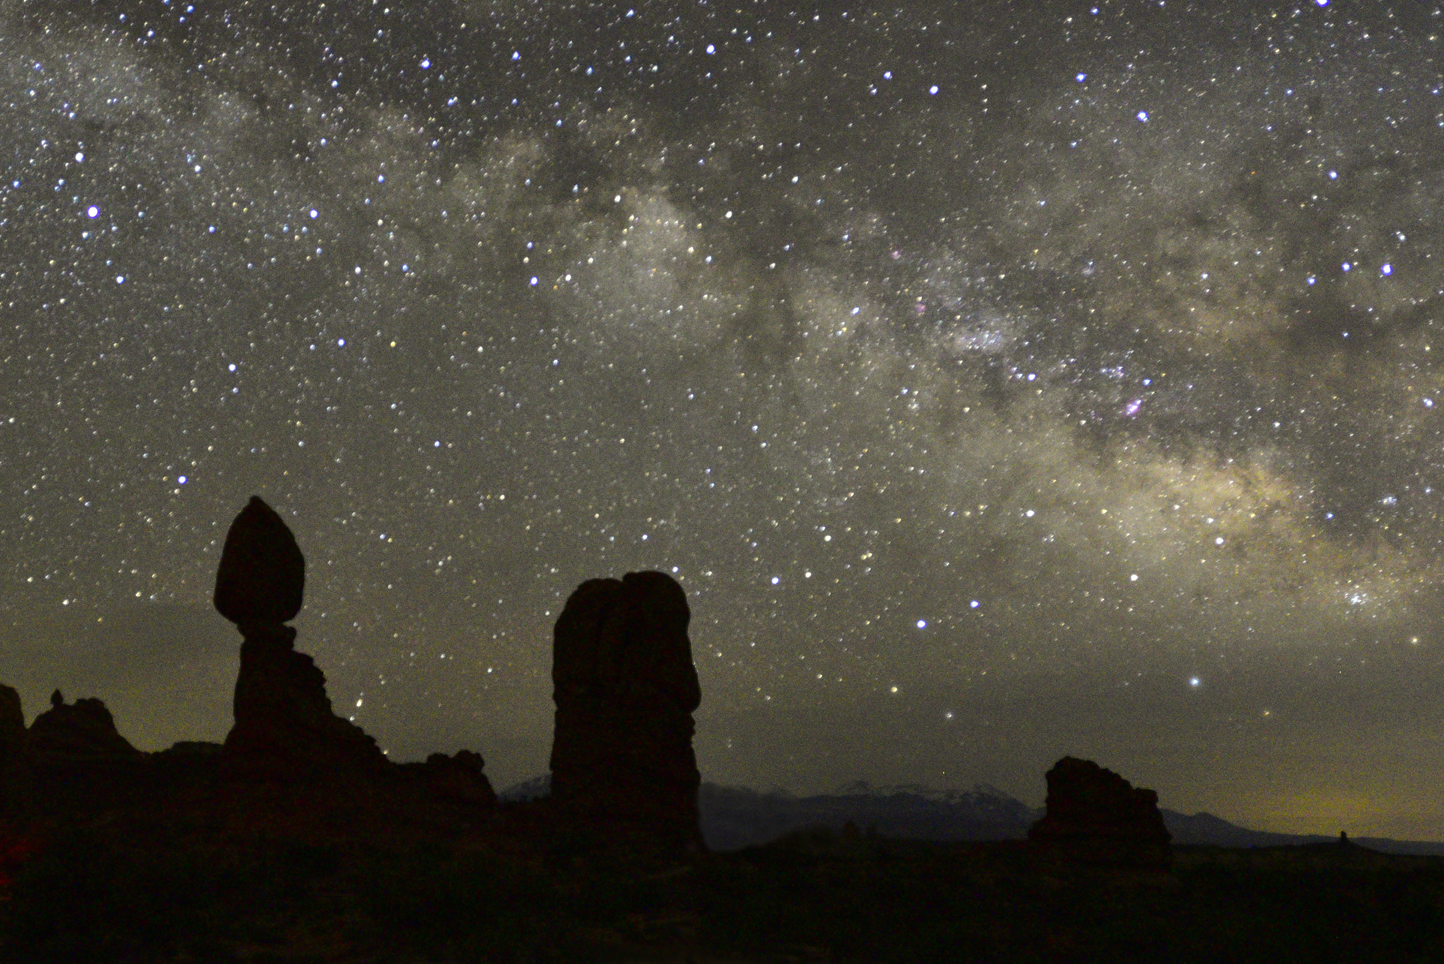 The Milky Way  -  from Balanced Rock parking area, Arches National Park, Utah